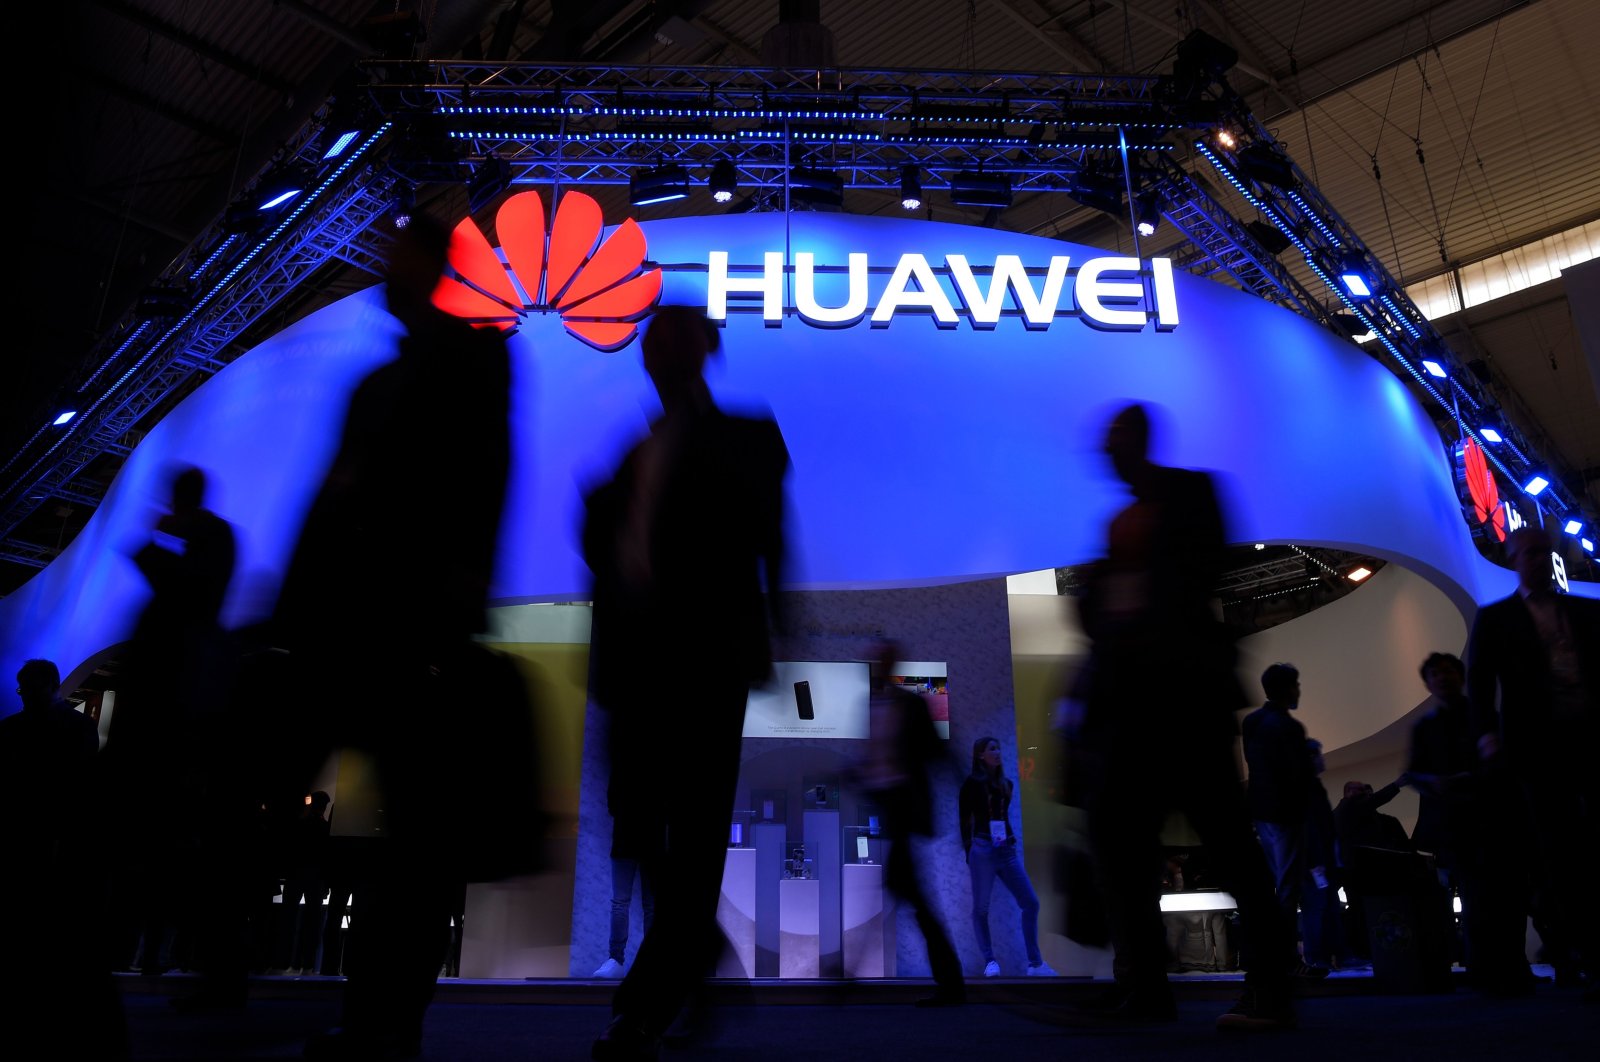 Visitors walk in front of the Huawei stand on the first day of the Mobile World Congress in Barcelona, Spain, Feb. 27, 2017. (AFP Photo)